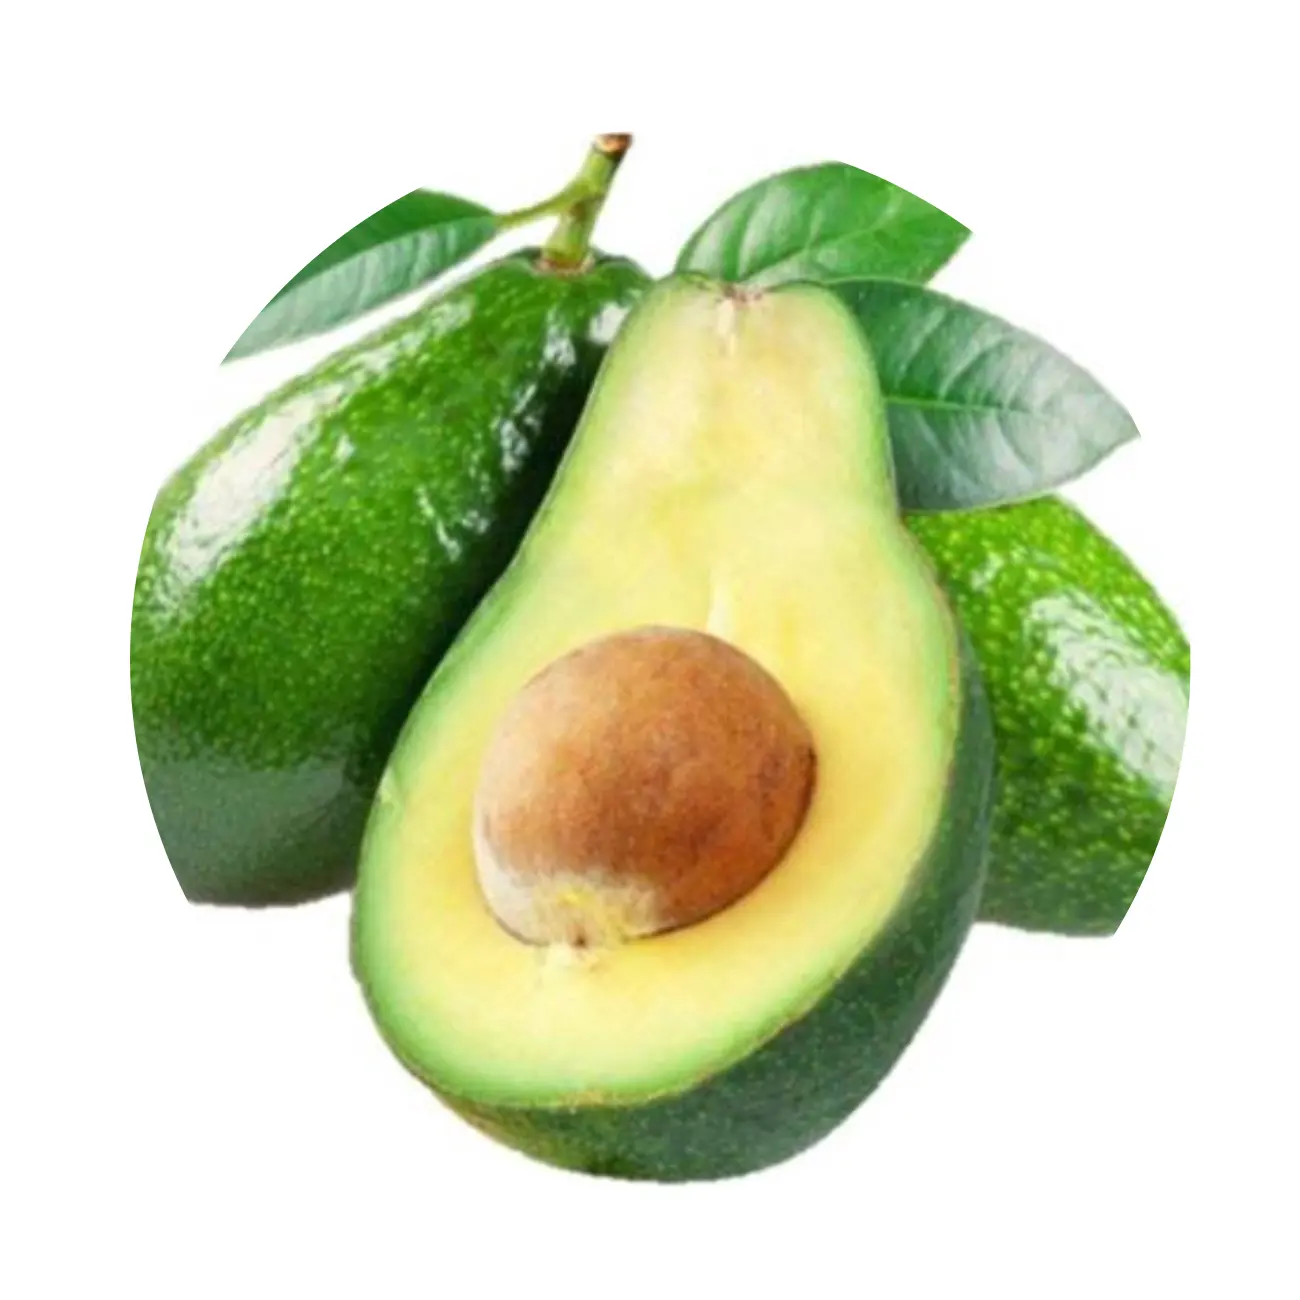 BEST FROZEN AVOCADO FROM VIET NAM - HOT DEALS FRUIT SUMMER 2022 - BEST QUALITY AND COMPETITIVE PRICE